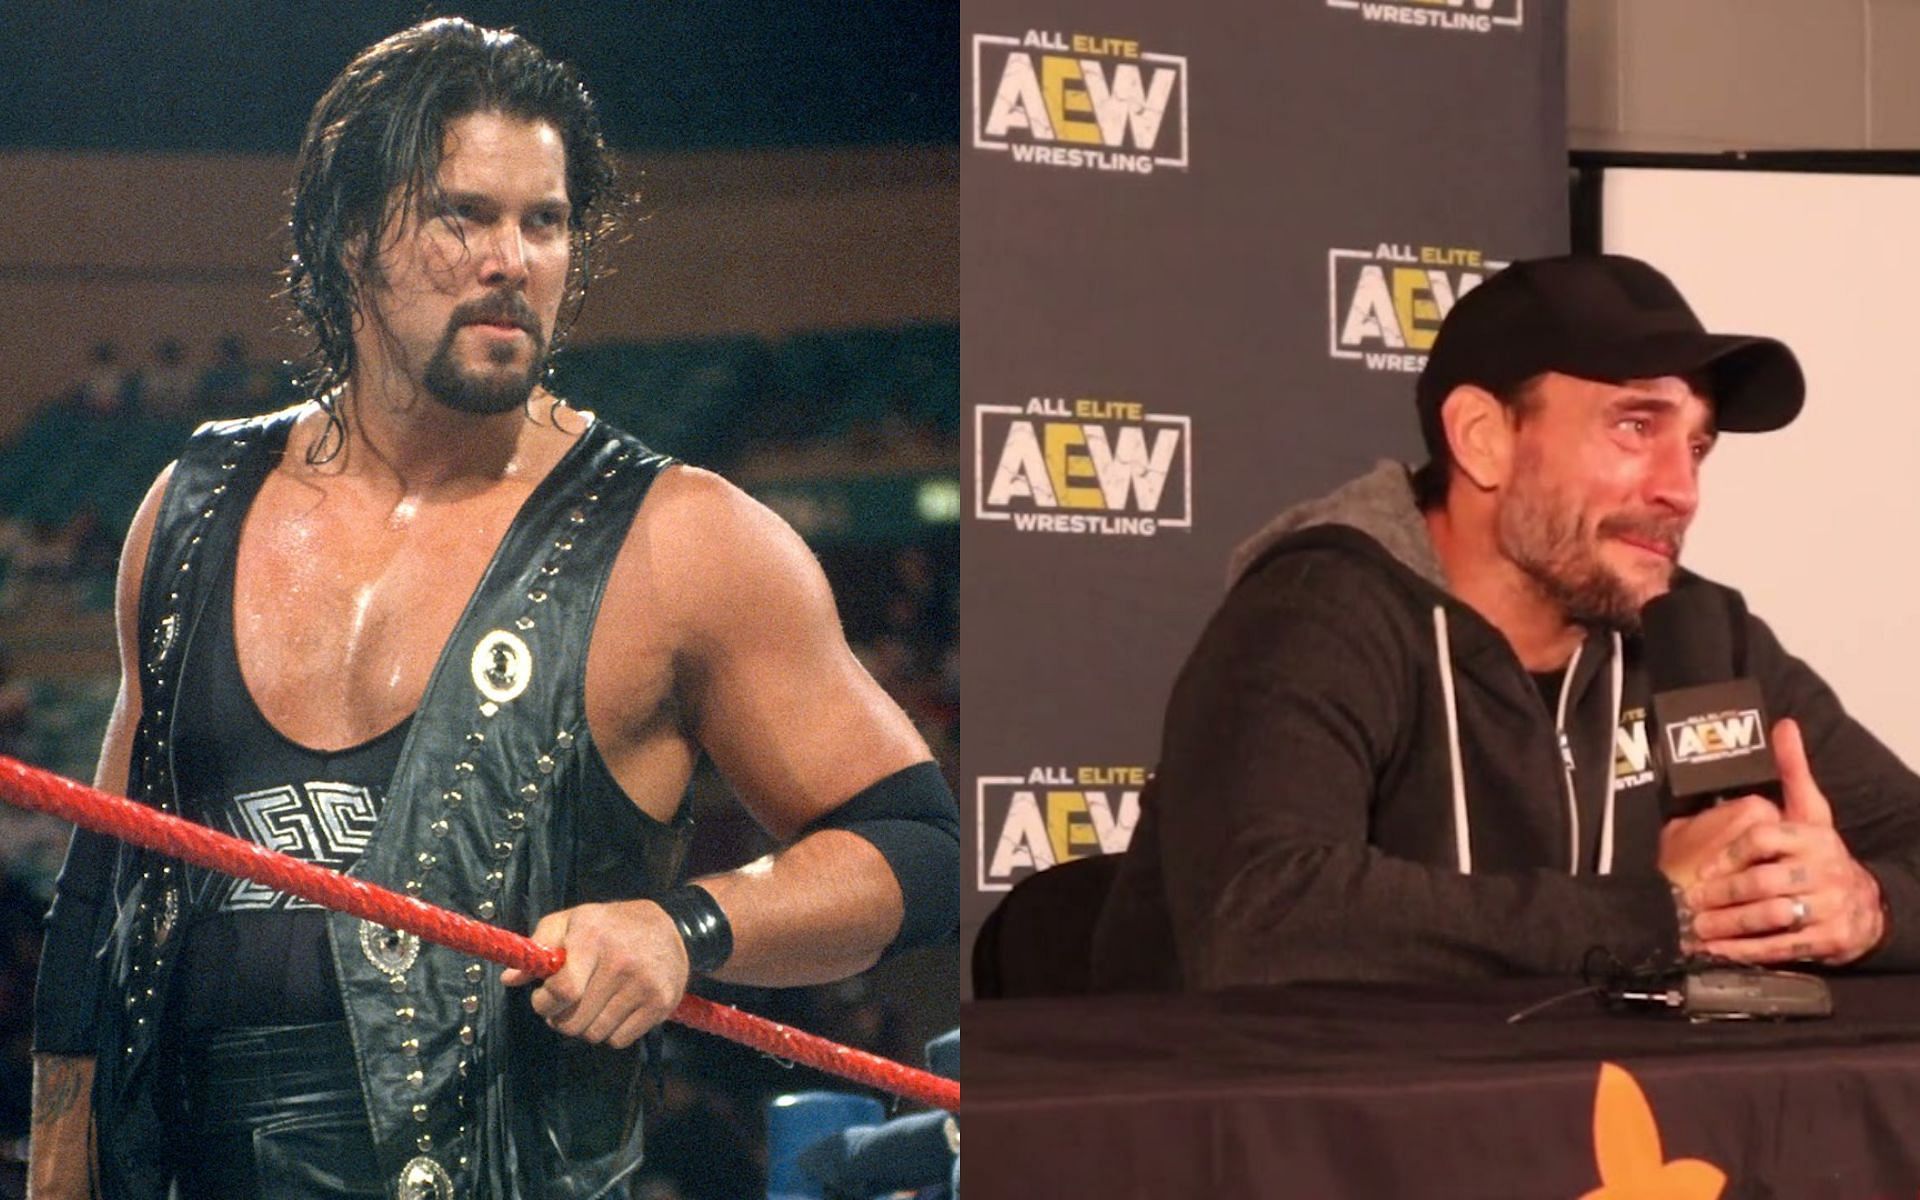 WWE legend Kevin Nash (left) and AEW star CM Punk (right).